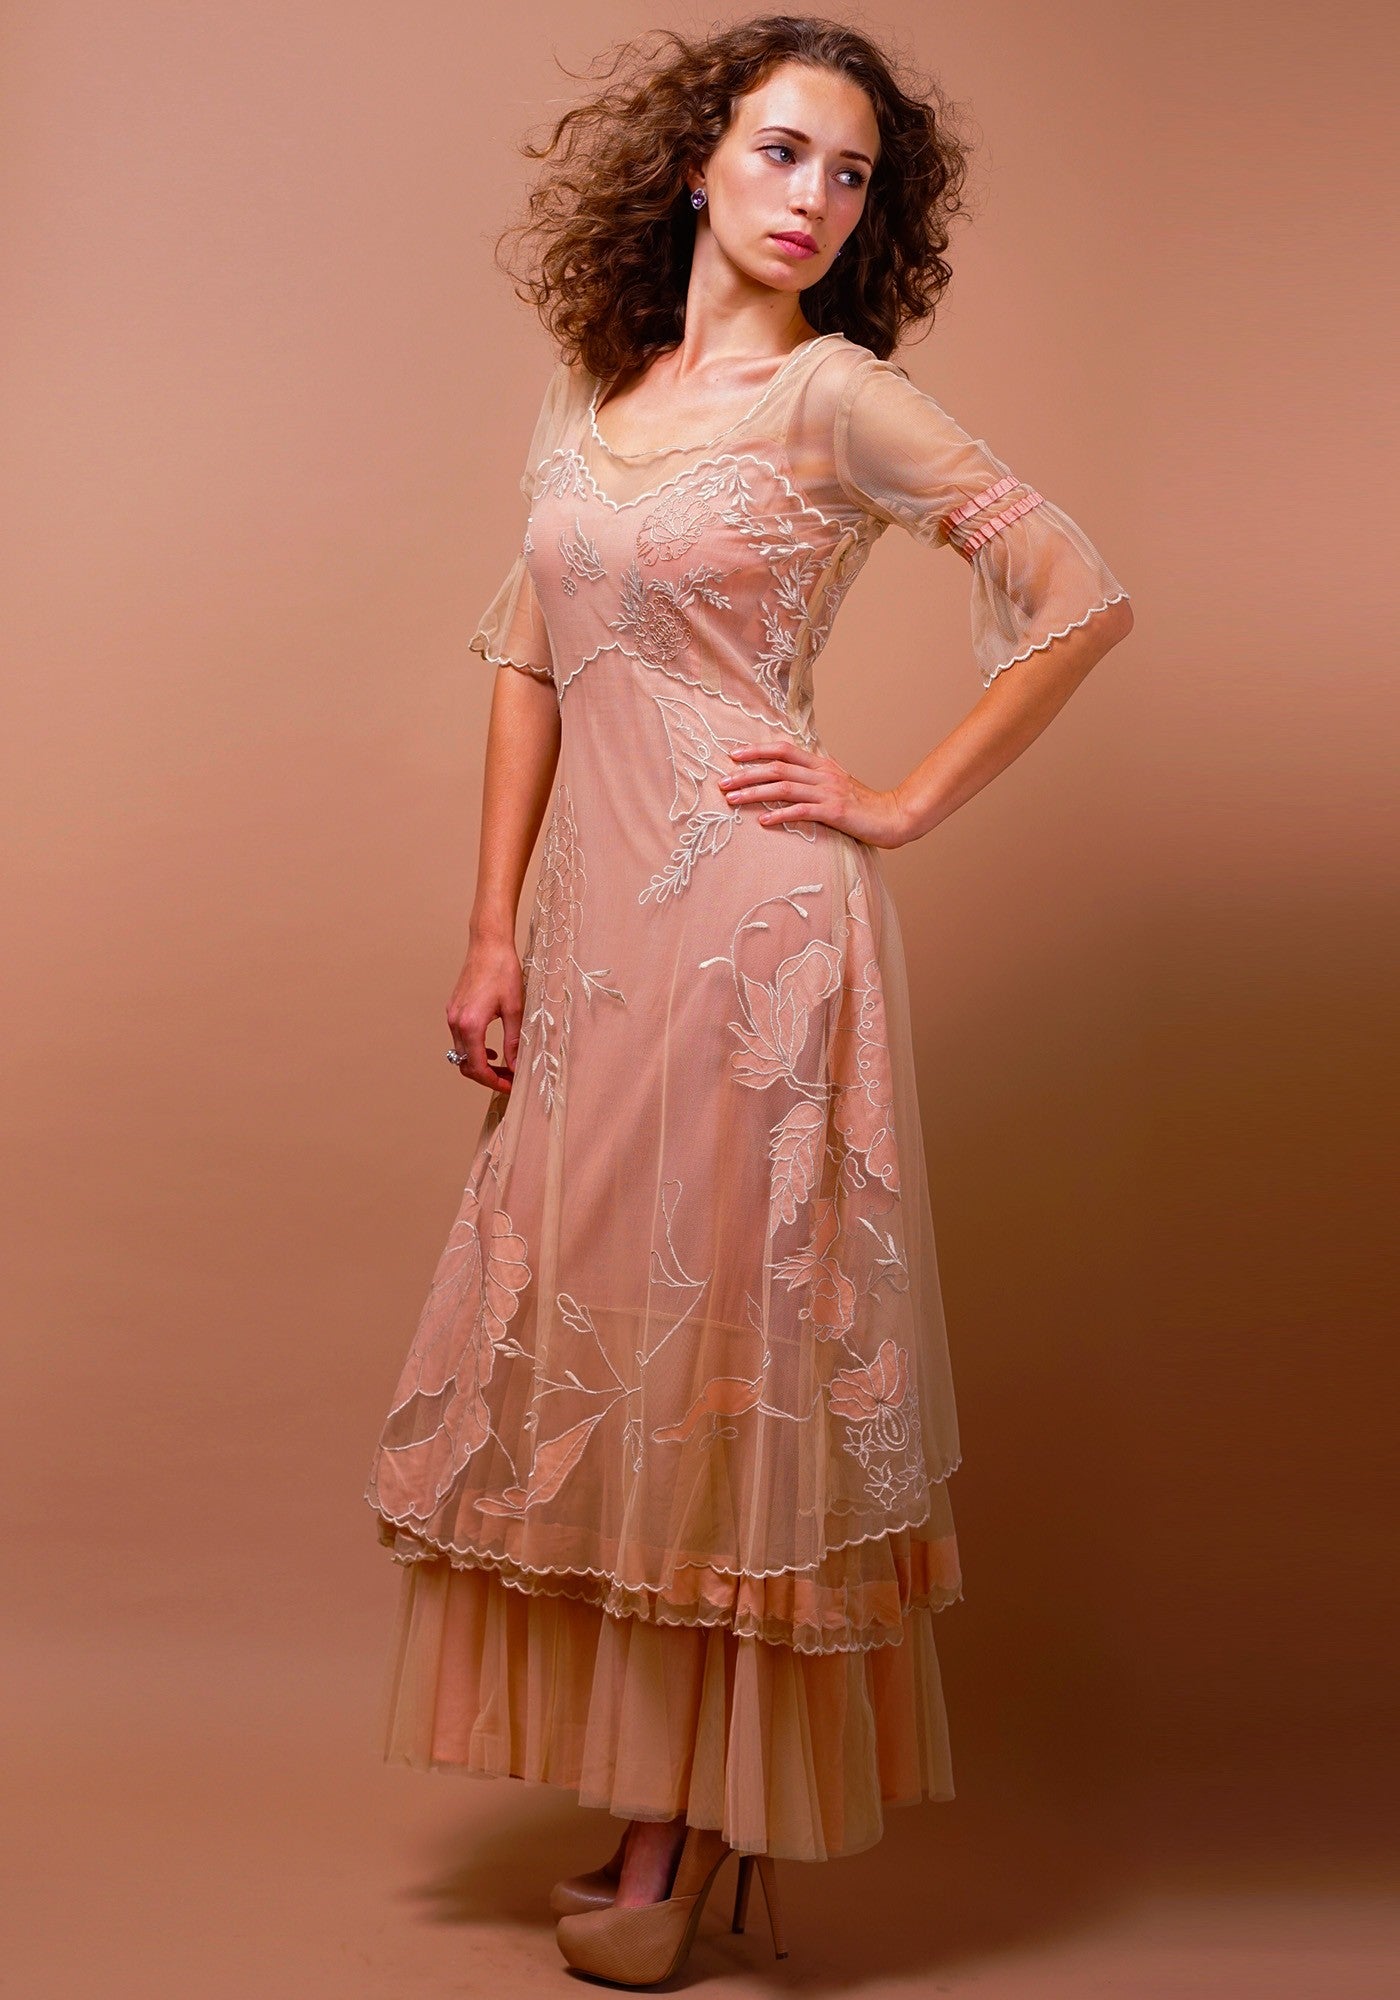 Titanic Tiered Vintage Wedding Dress in Pink-Champagne by Nataya - SOLD OUT